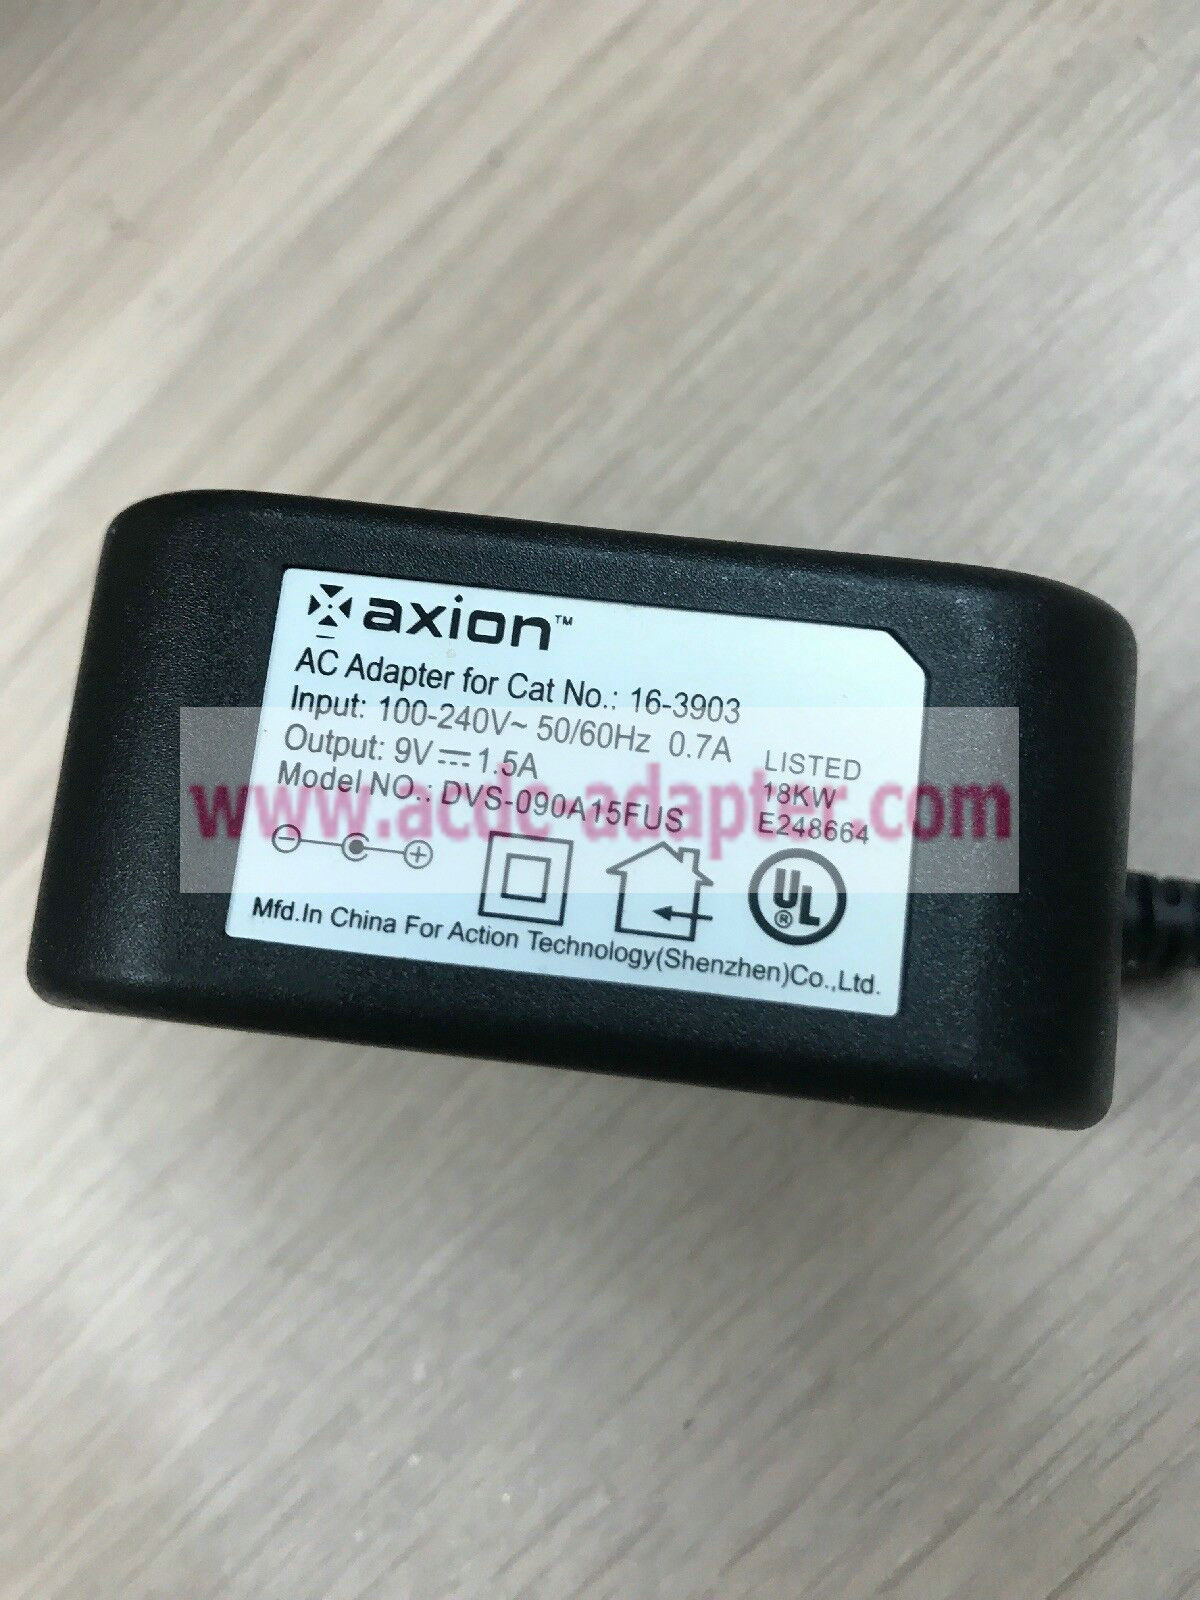 Original 9V 1.5A Axion DVS-090A15FUS AC Power Supply Adapter Charger - Click Image to Close